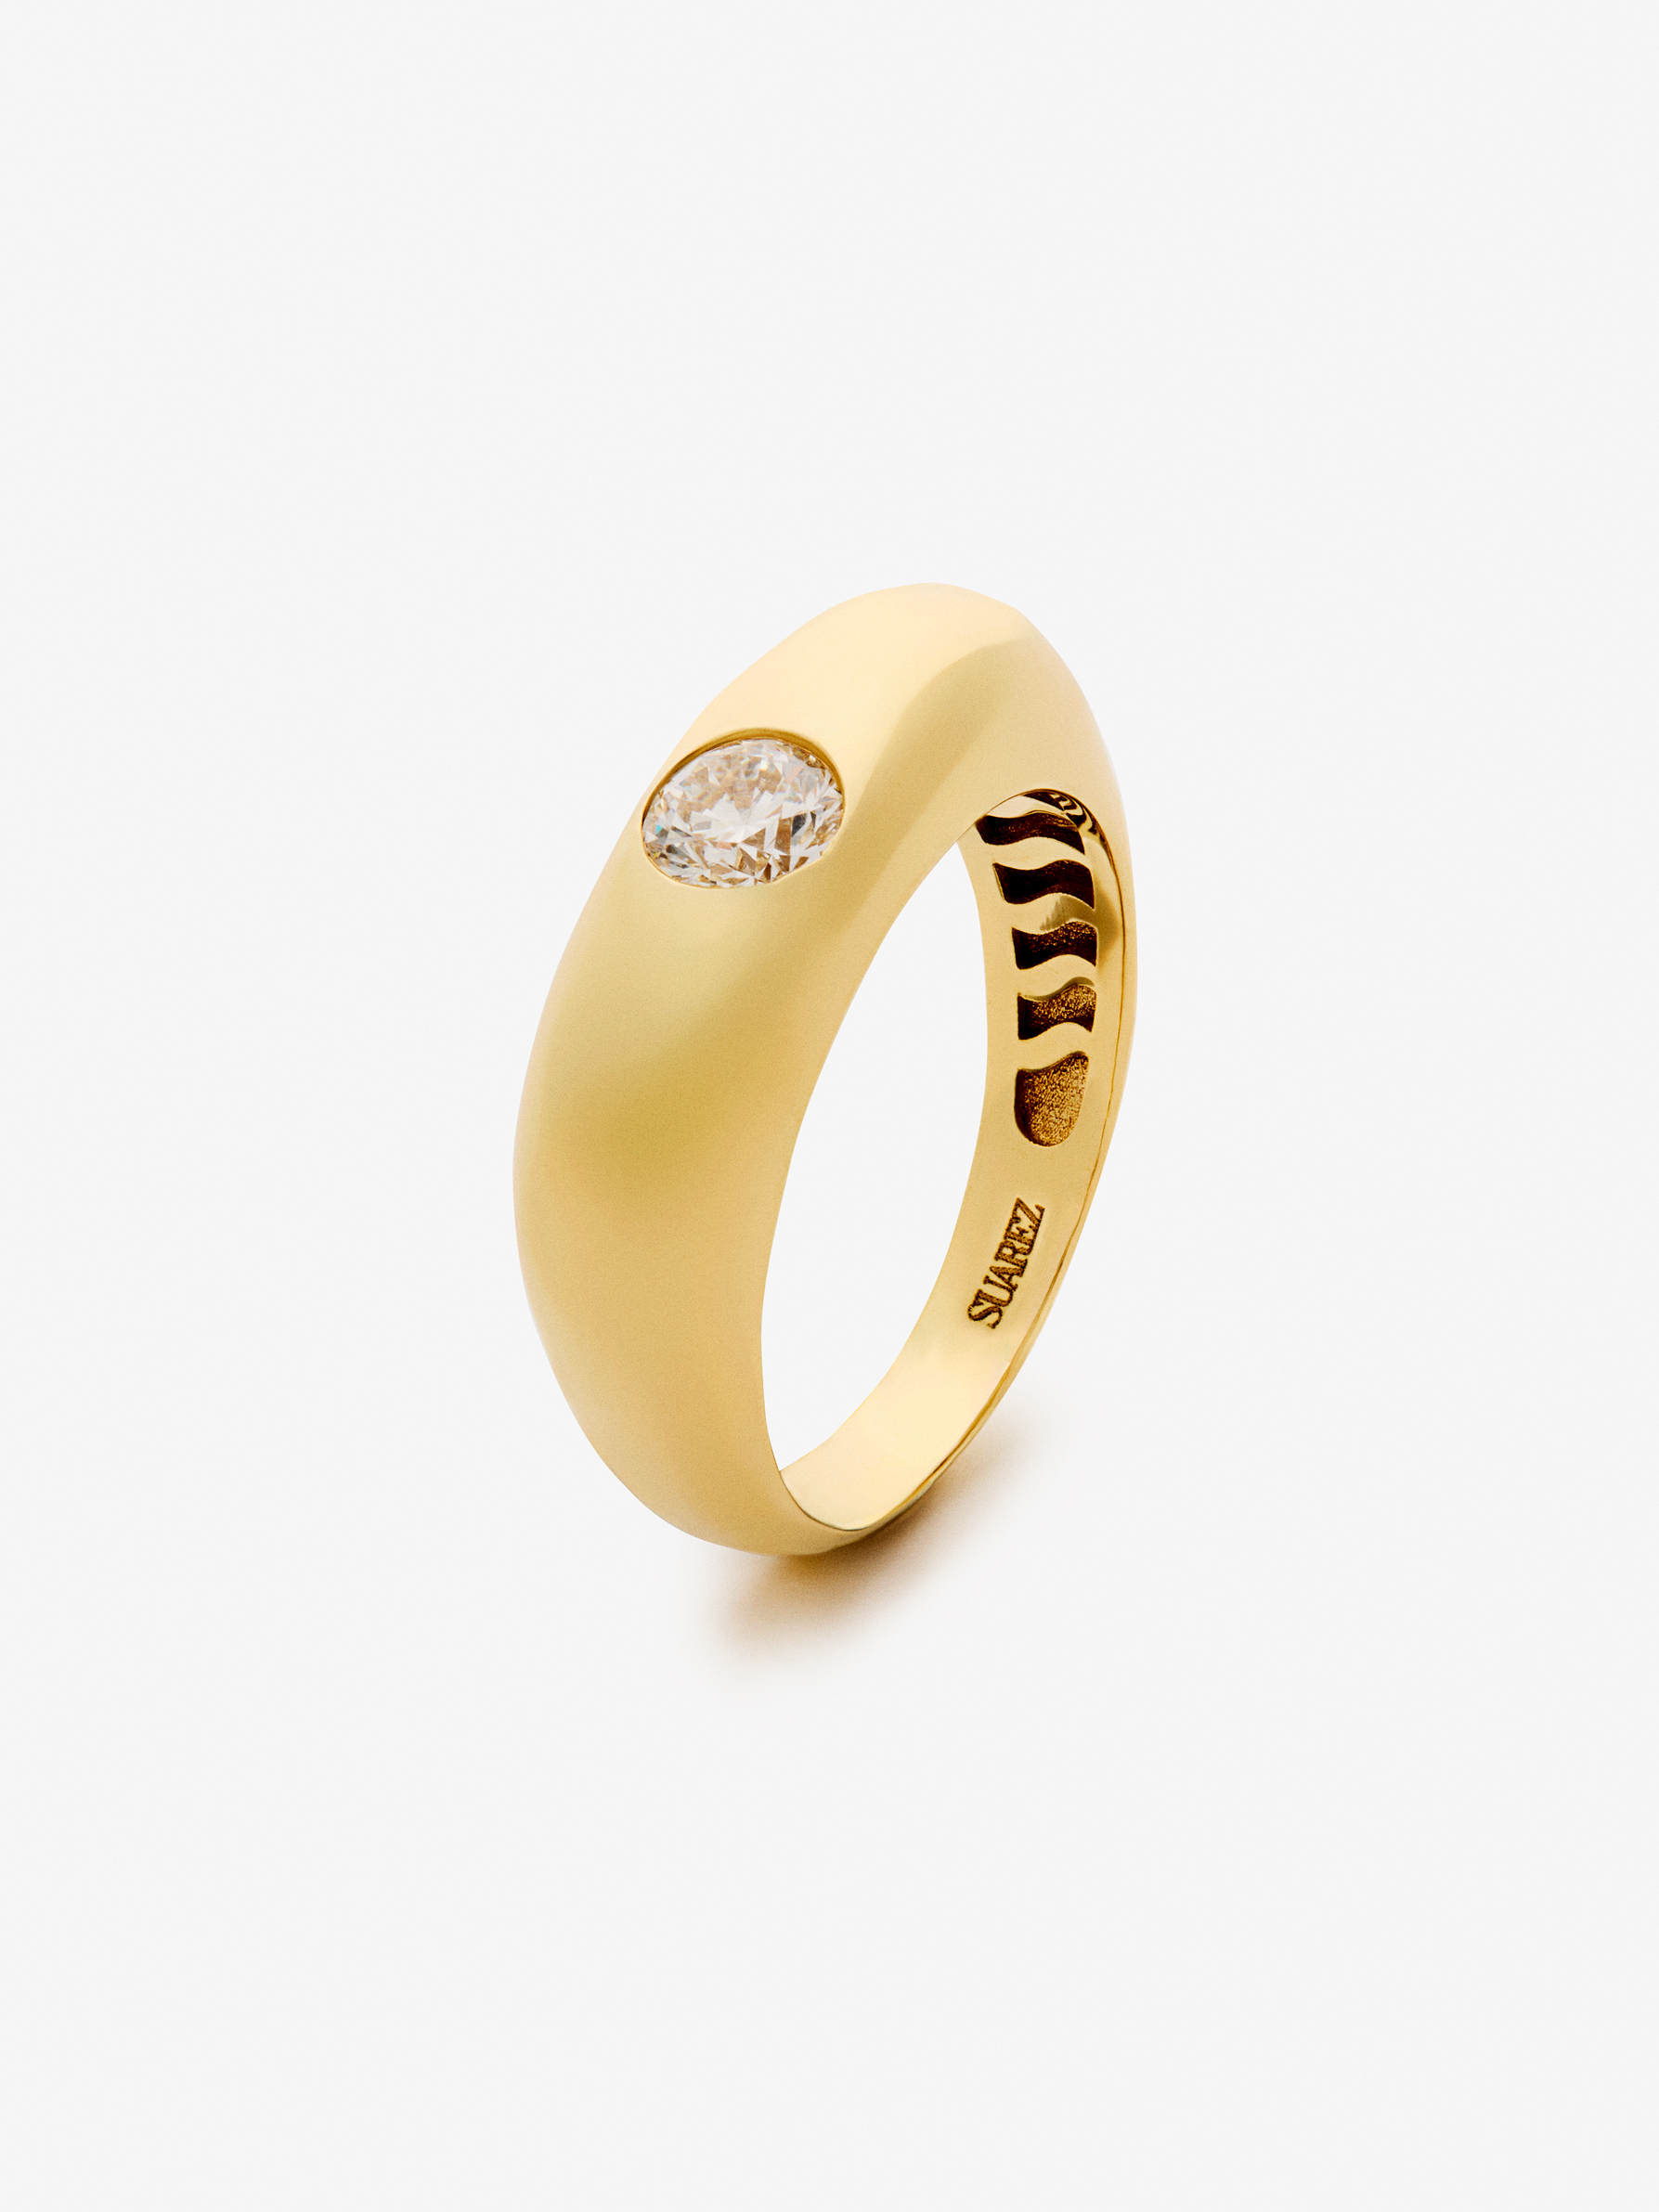 18K yellow gold ring with 0.4 ct brilliant cut diamond